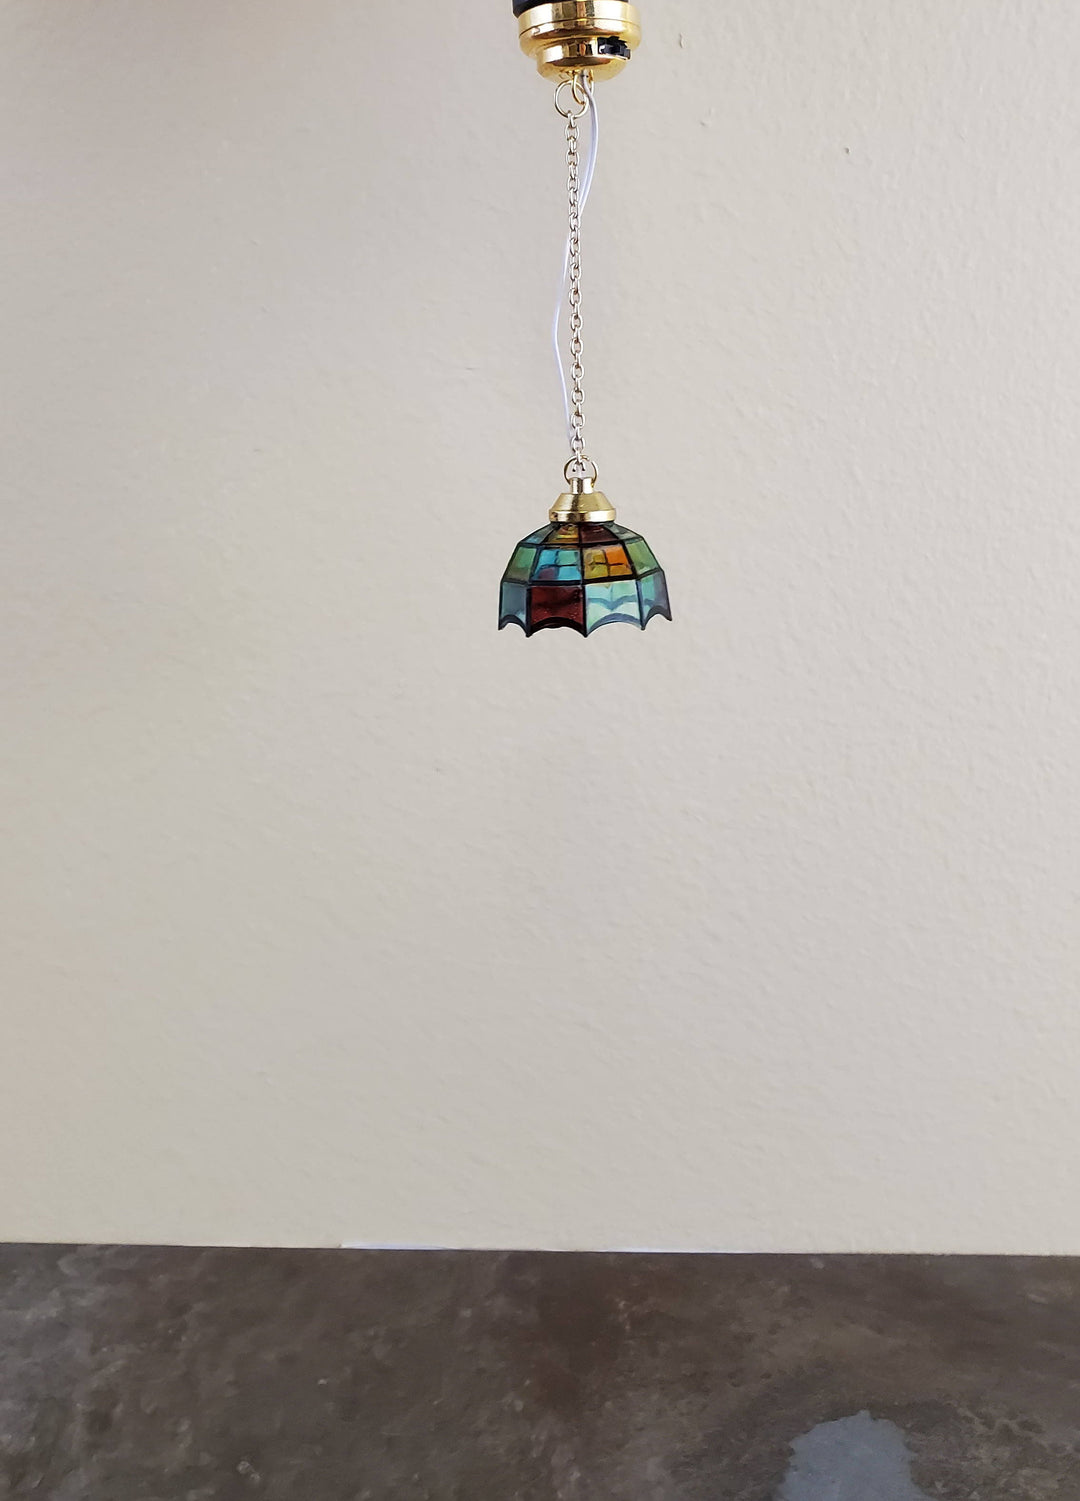 Dollhouse Miniature Battery Light Hanging Ceiling Stained Glass Style 1:12 Scale